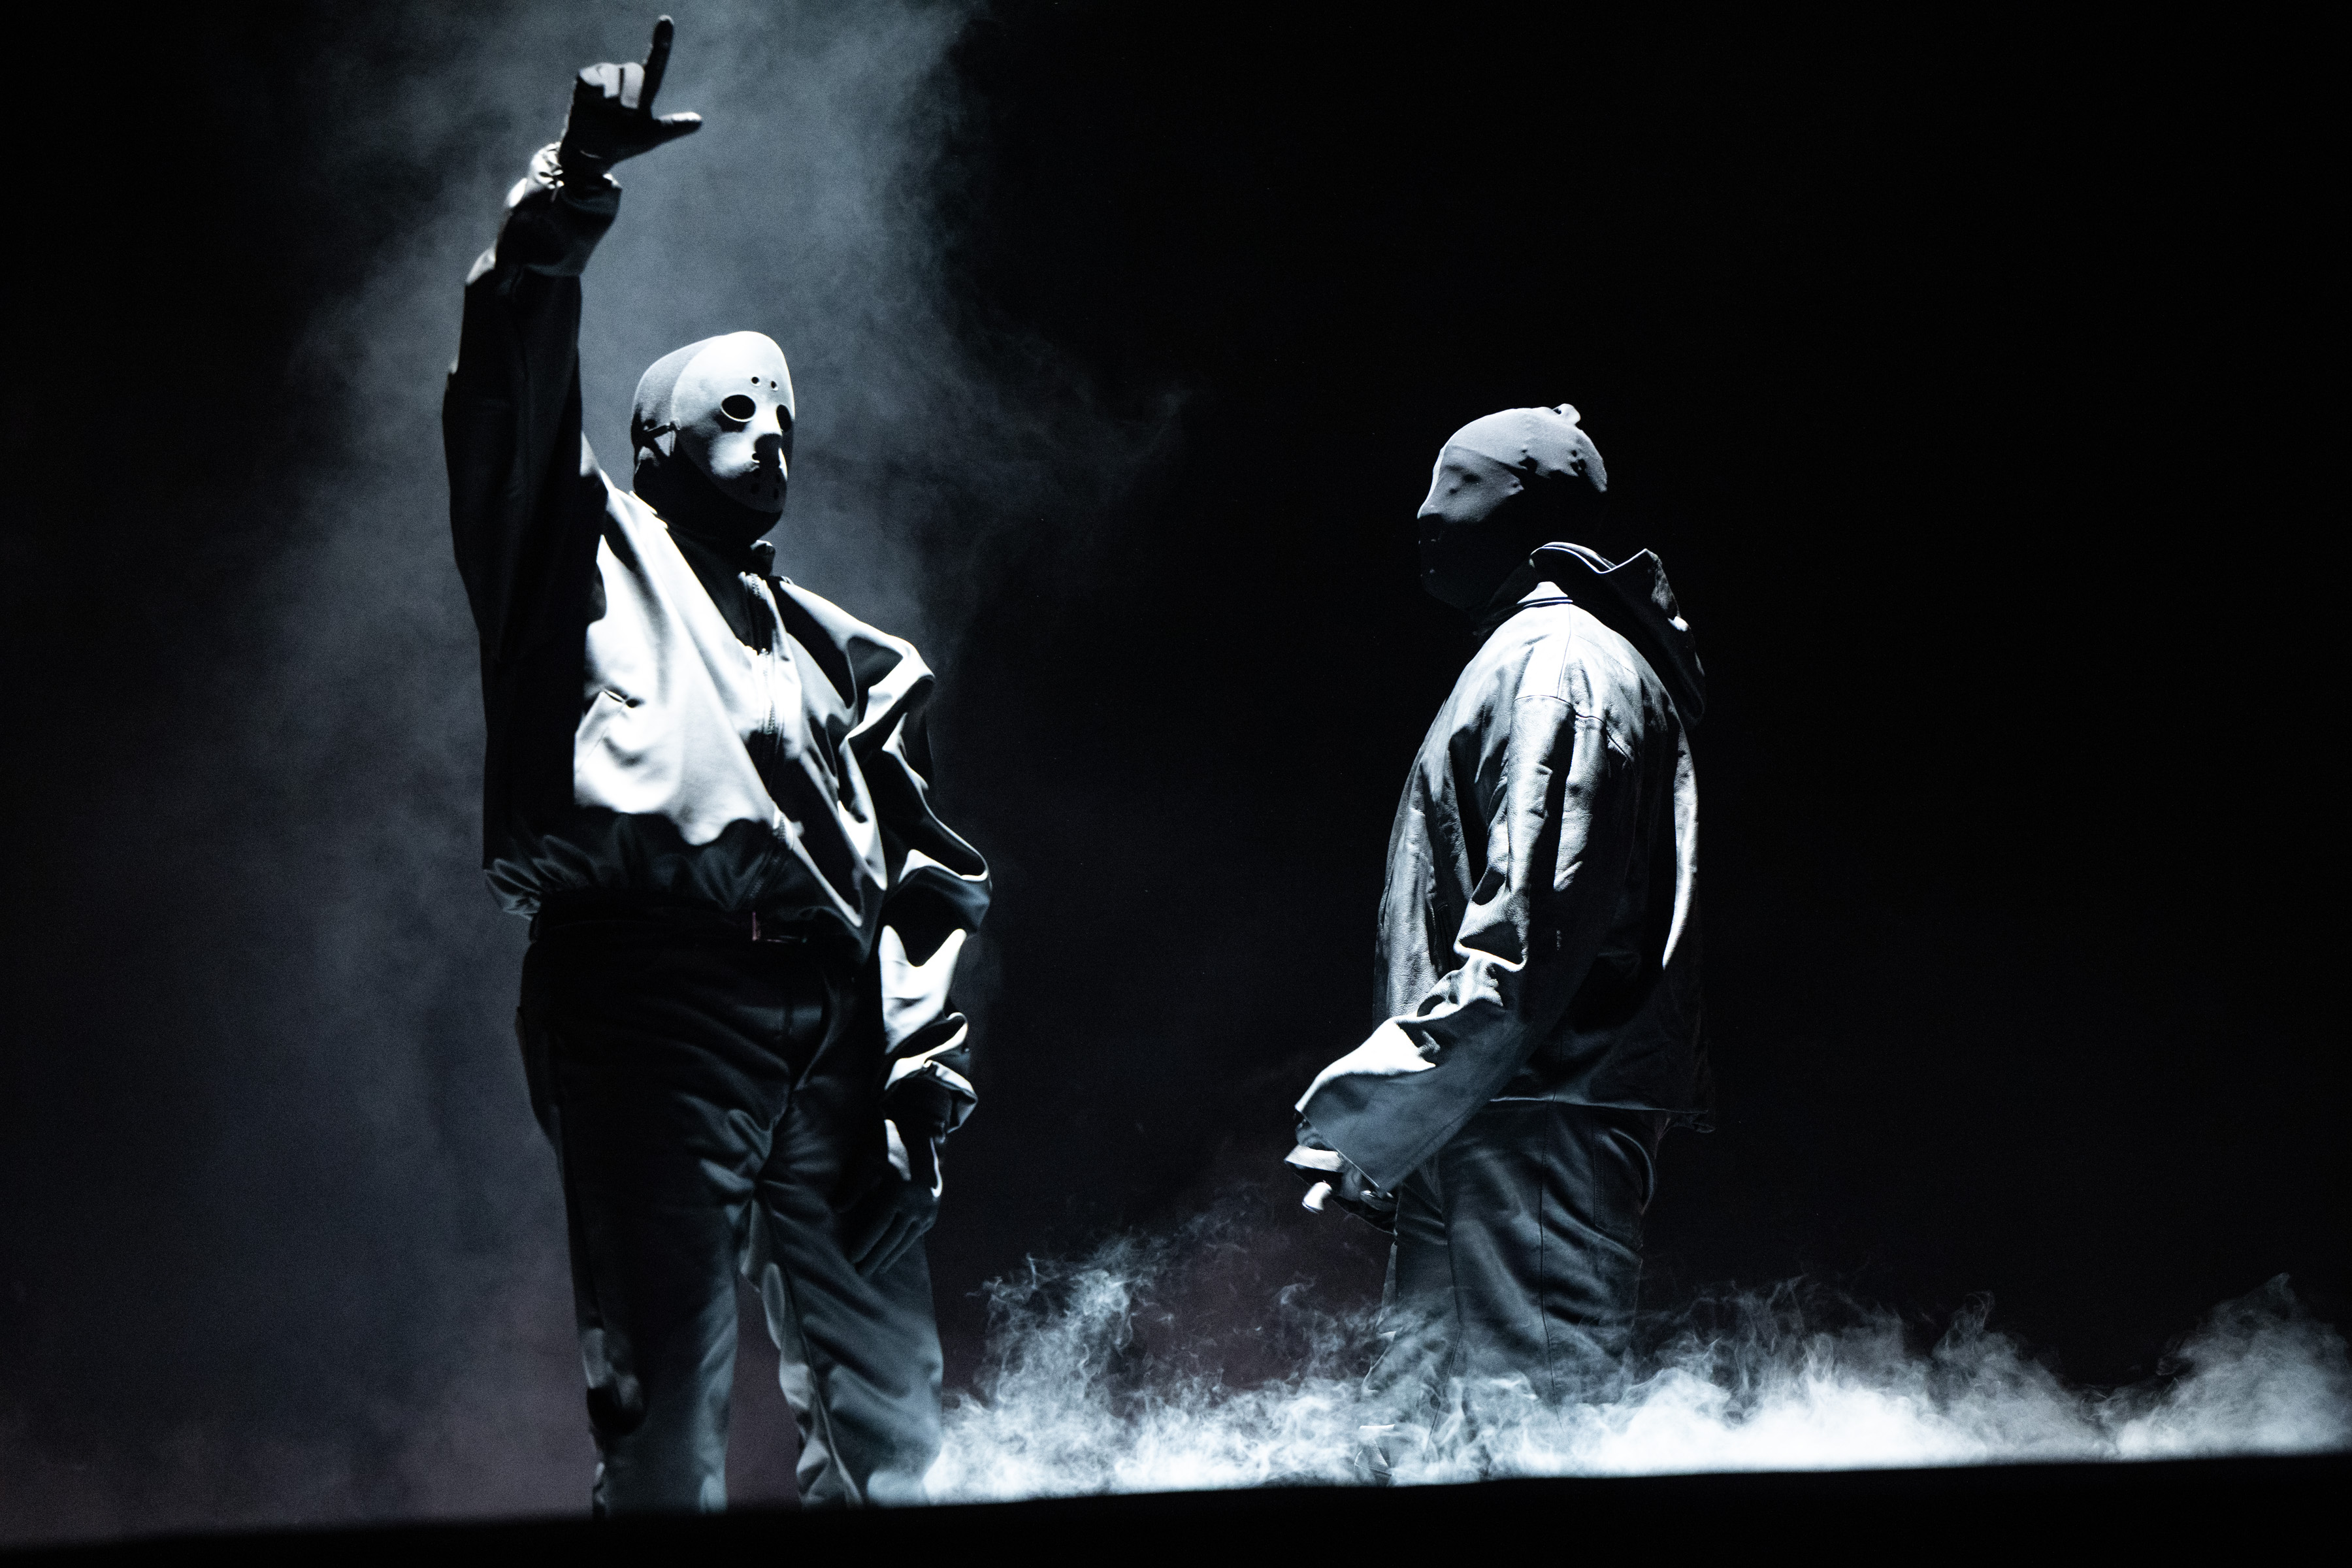 Fans reported that Kanye's album, Vultures 1, was played as he danced, with no live performance or new music